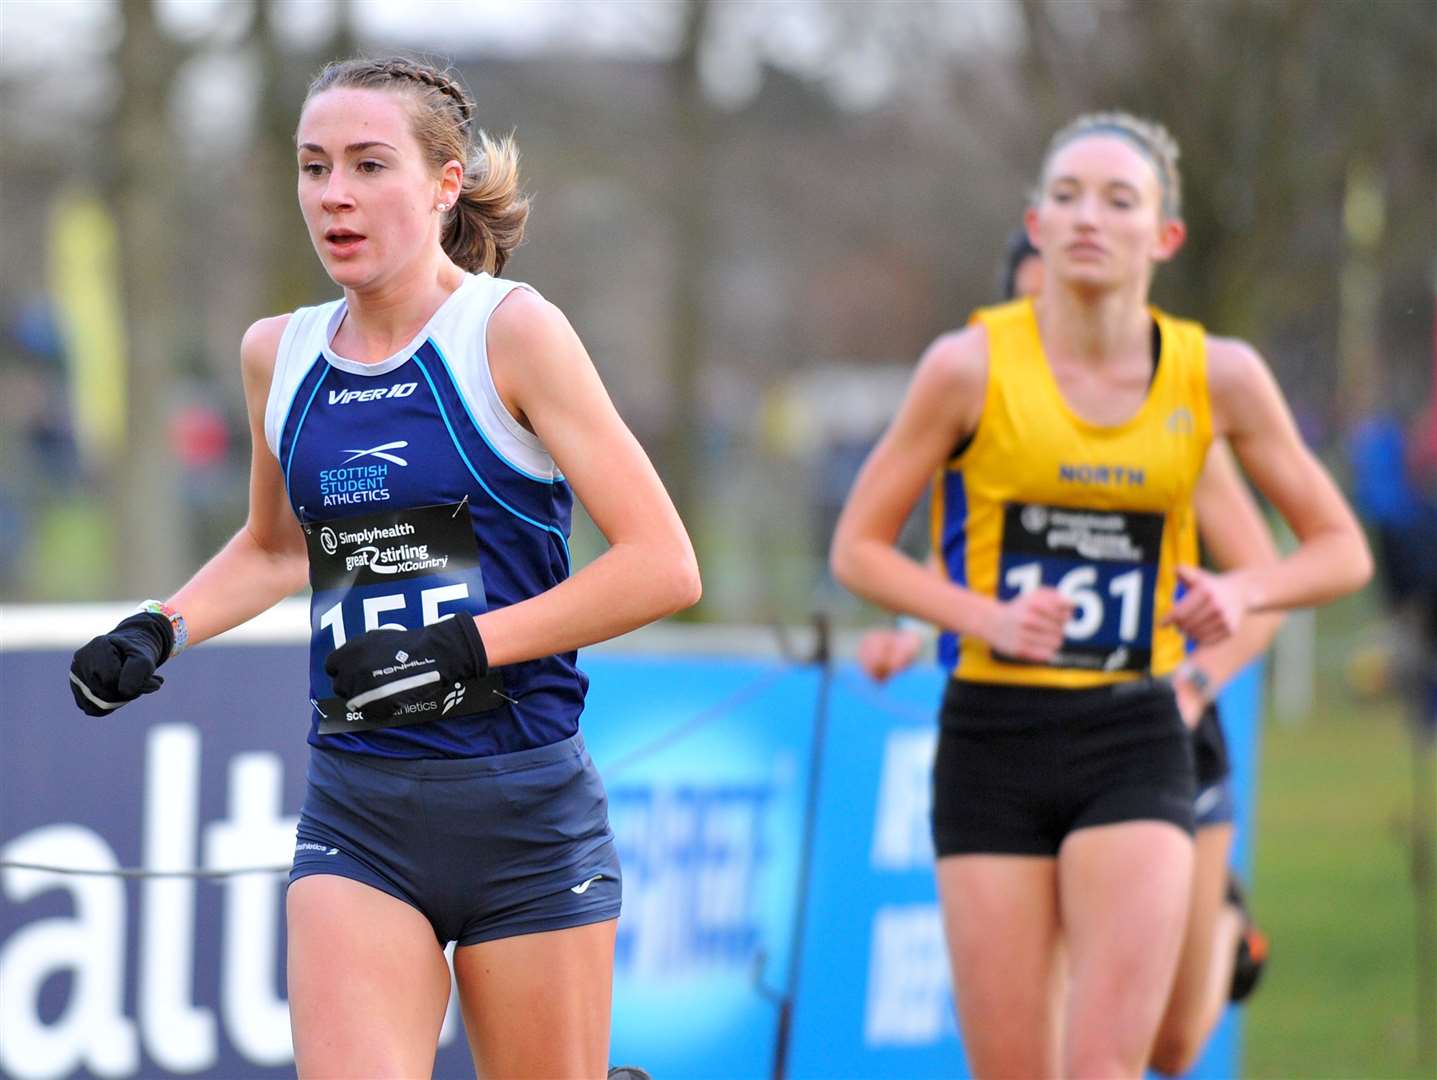 Mhairi Maclennan will compete at the World Cross Country Championships in Denmark. Picture: Graeme Webster